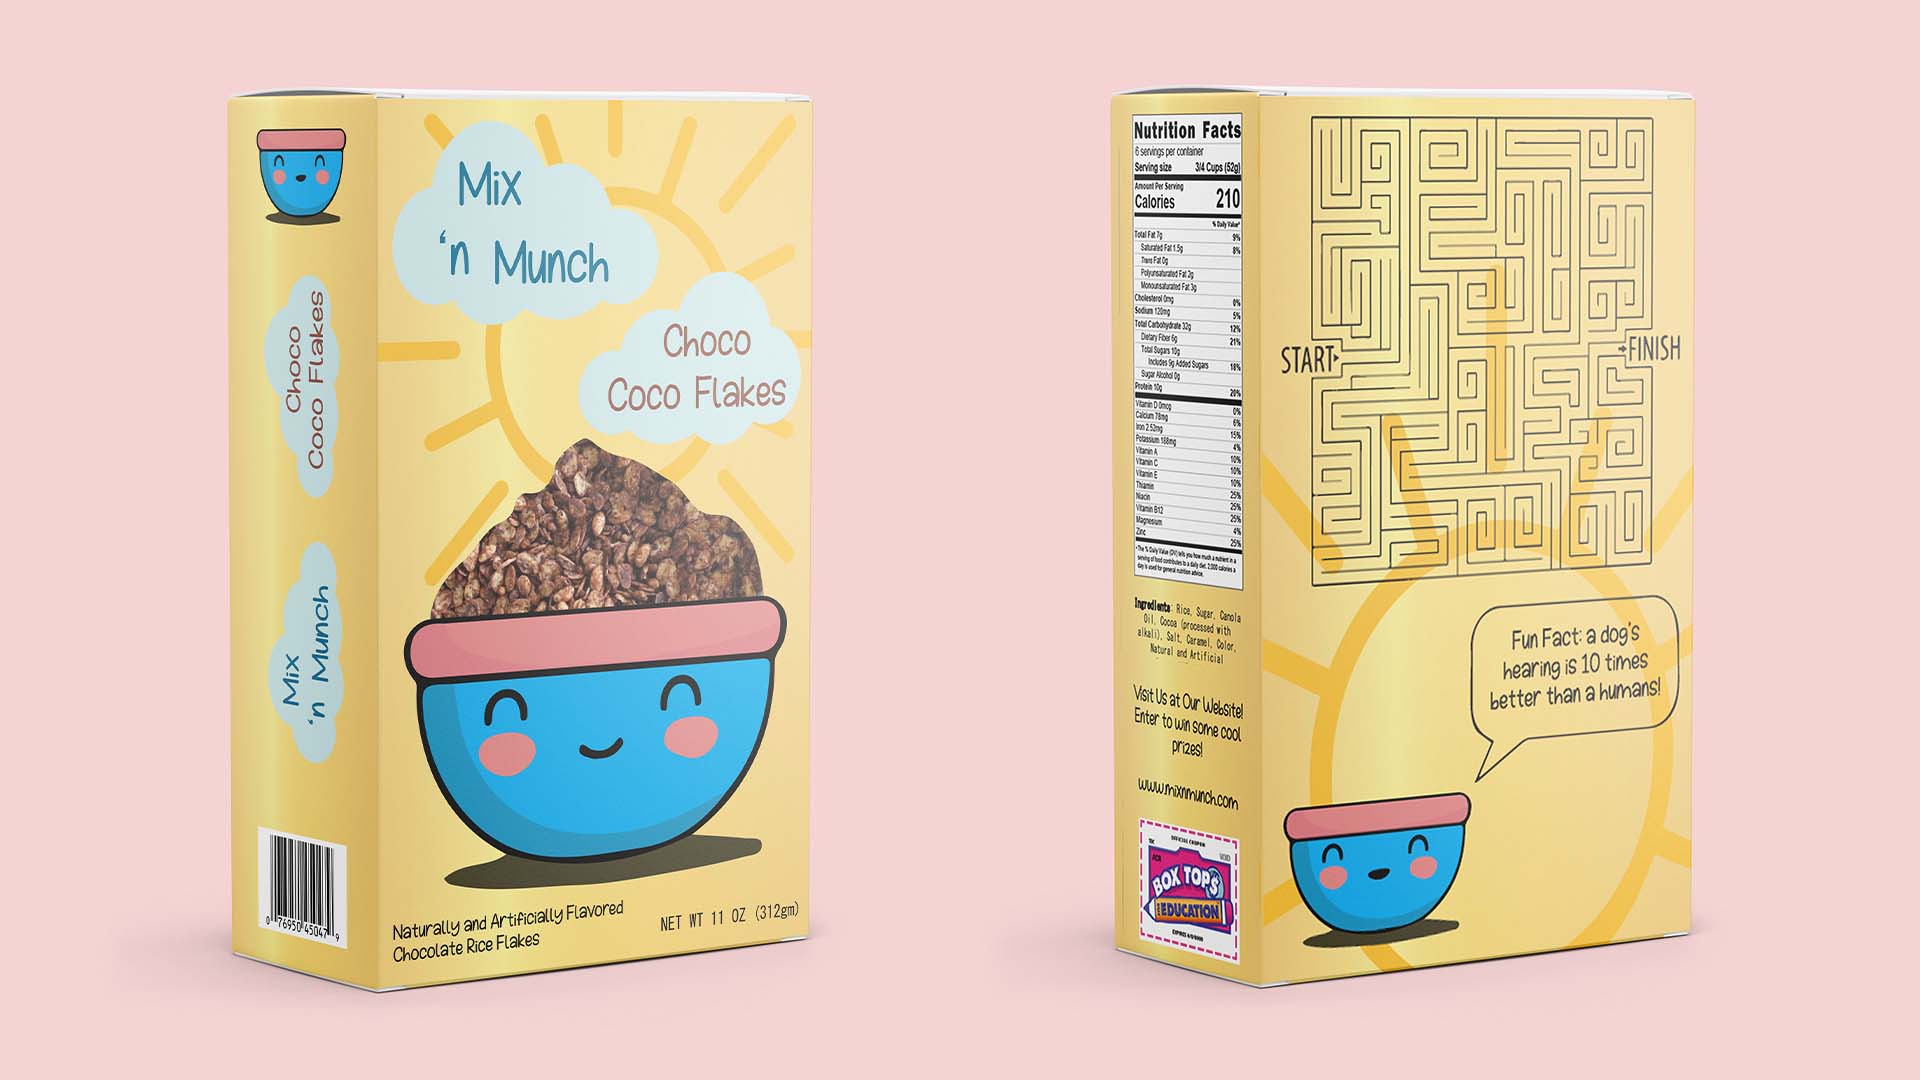  / “Cereal Label,” A new brand of cereal cardboard packaging, 8 x 1 3/4 x 12 1/8 inches­­ print, 2021. This ad caters towards children with a new type of cereal featuring a cute, easy to recognize mascot.  